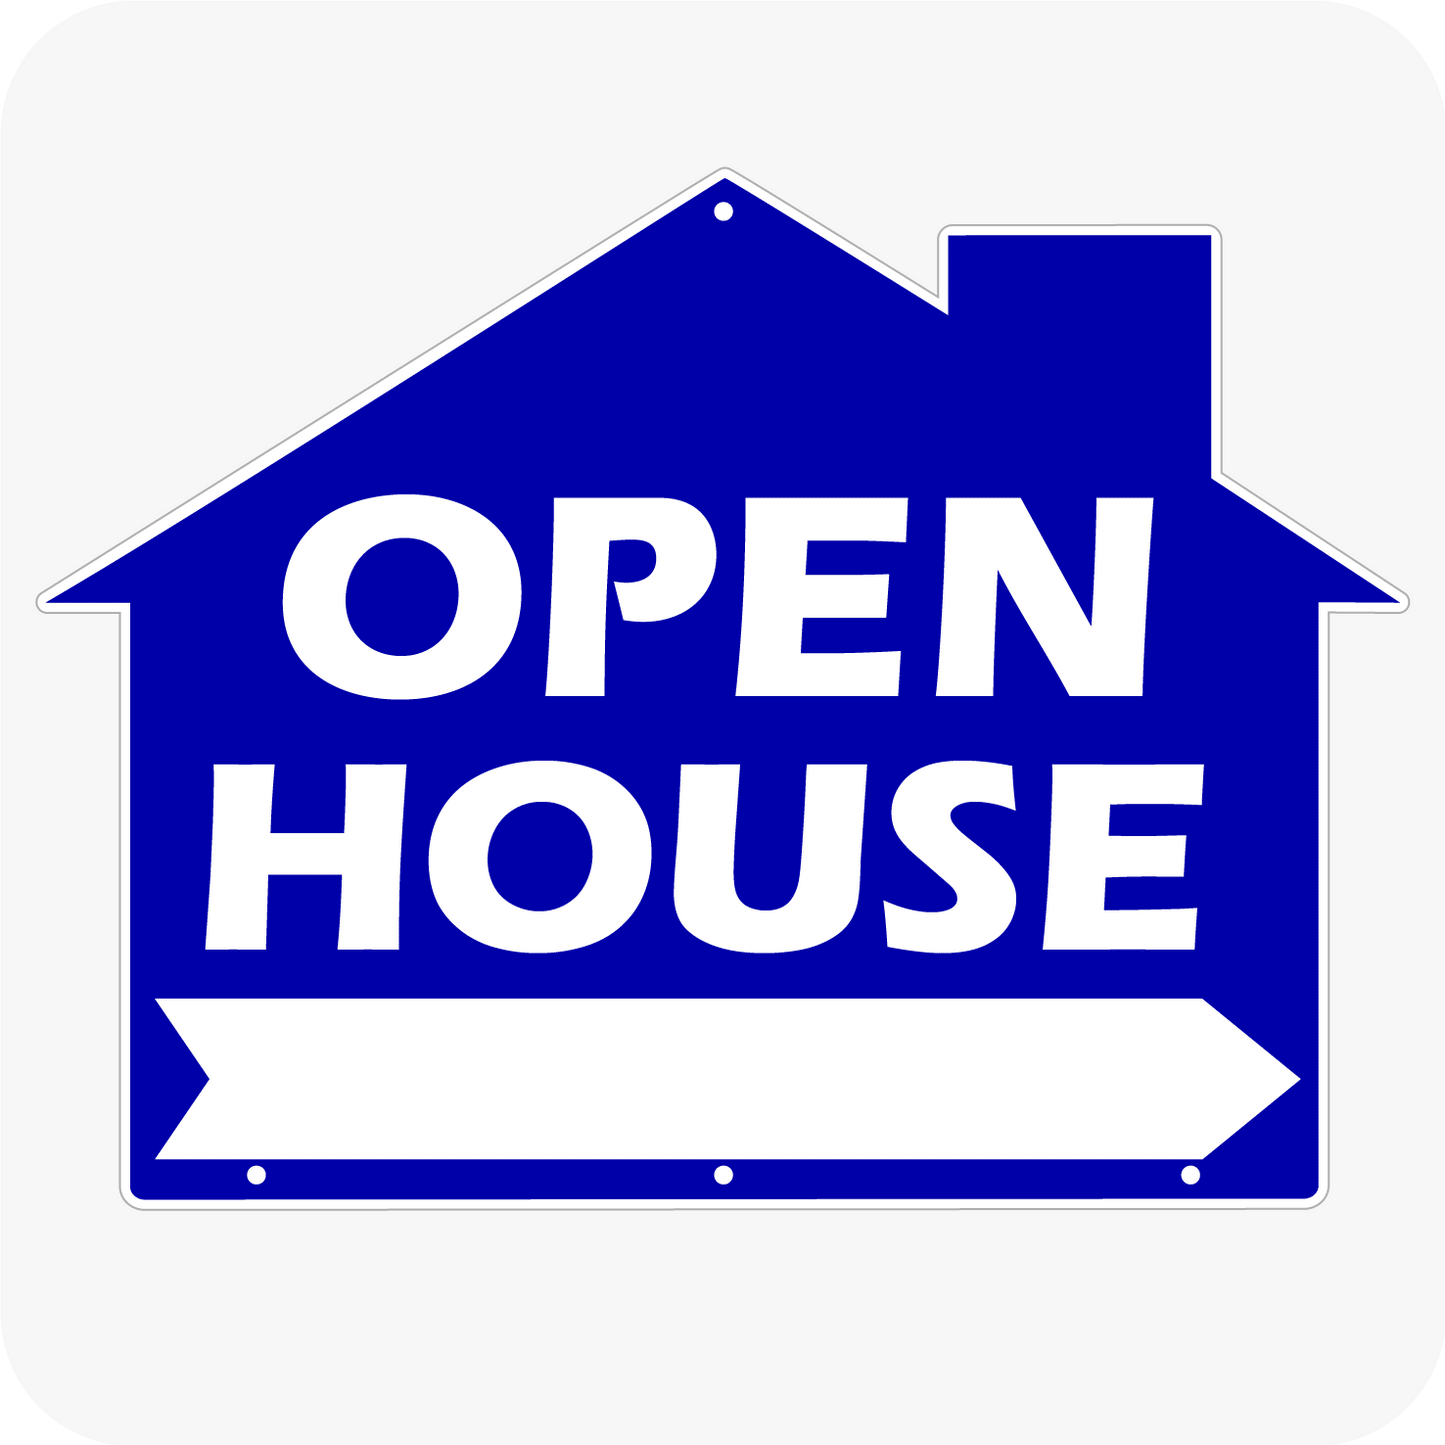 Open House House Shaped Sign 18 x 24 - Blue